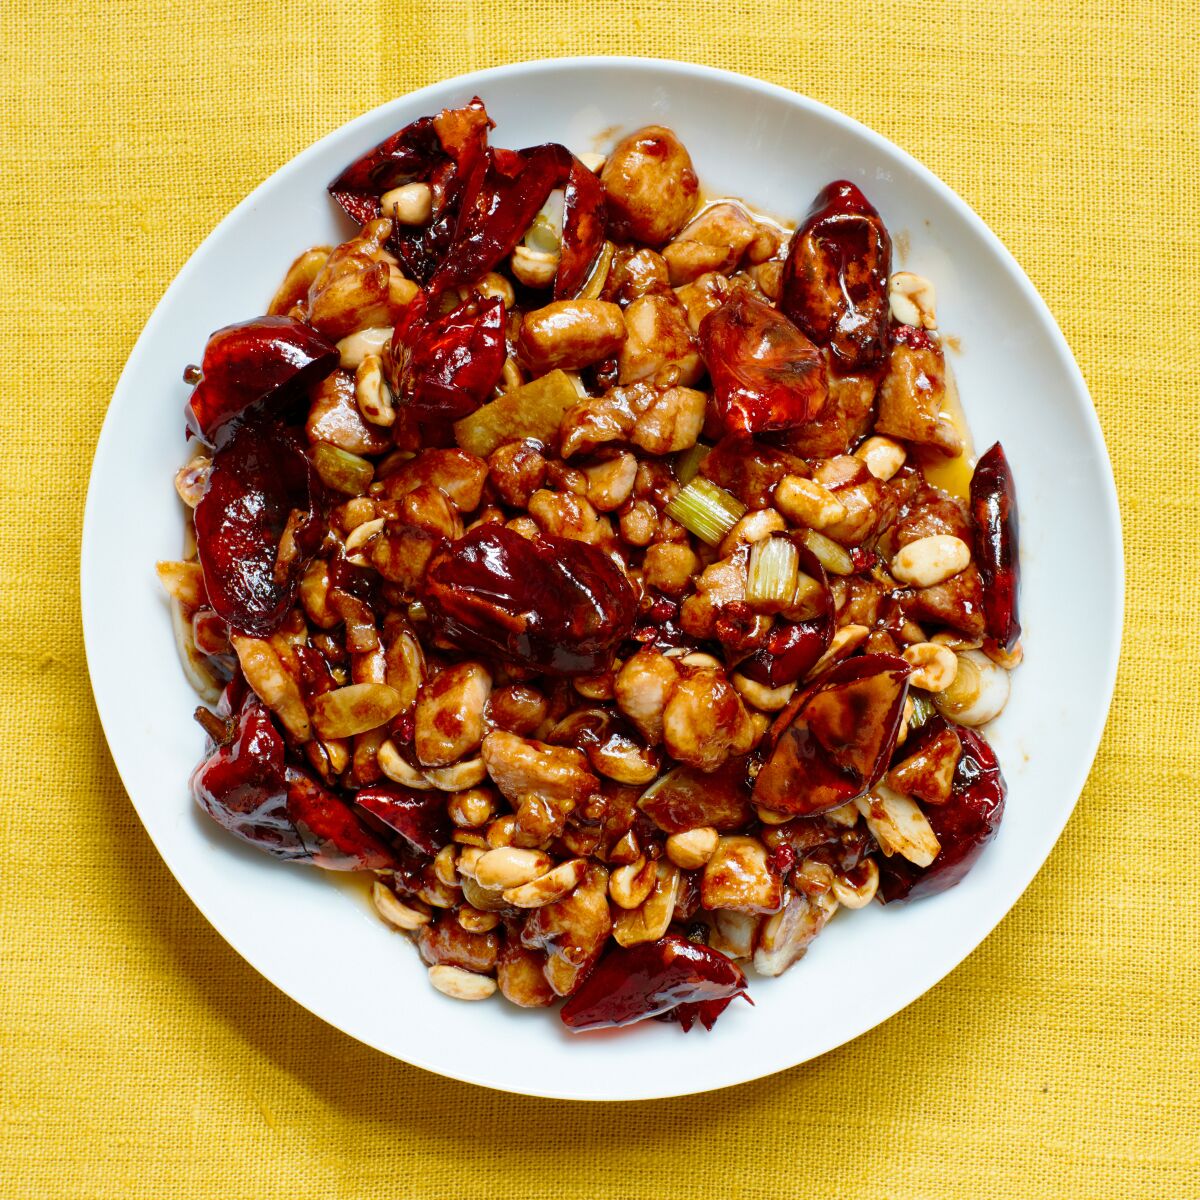 Chengdu-style kung pao combines peanuts with chicken and chiles.